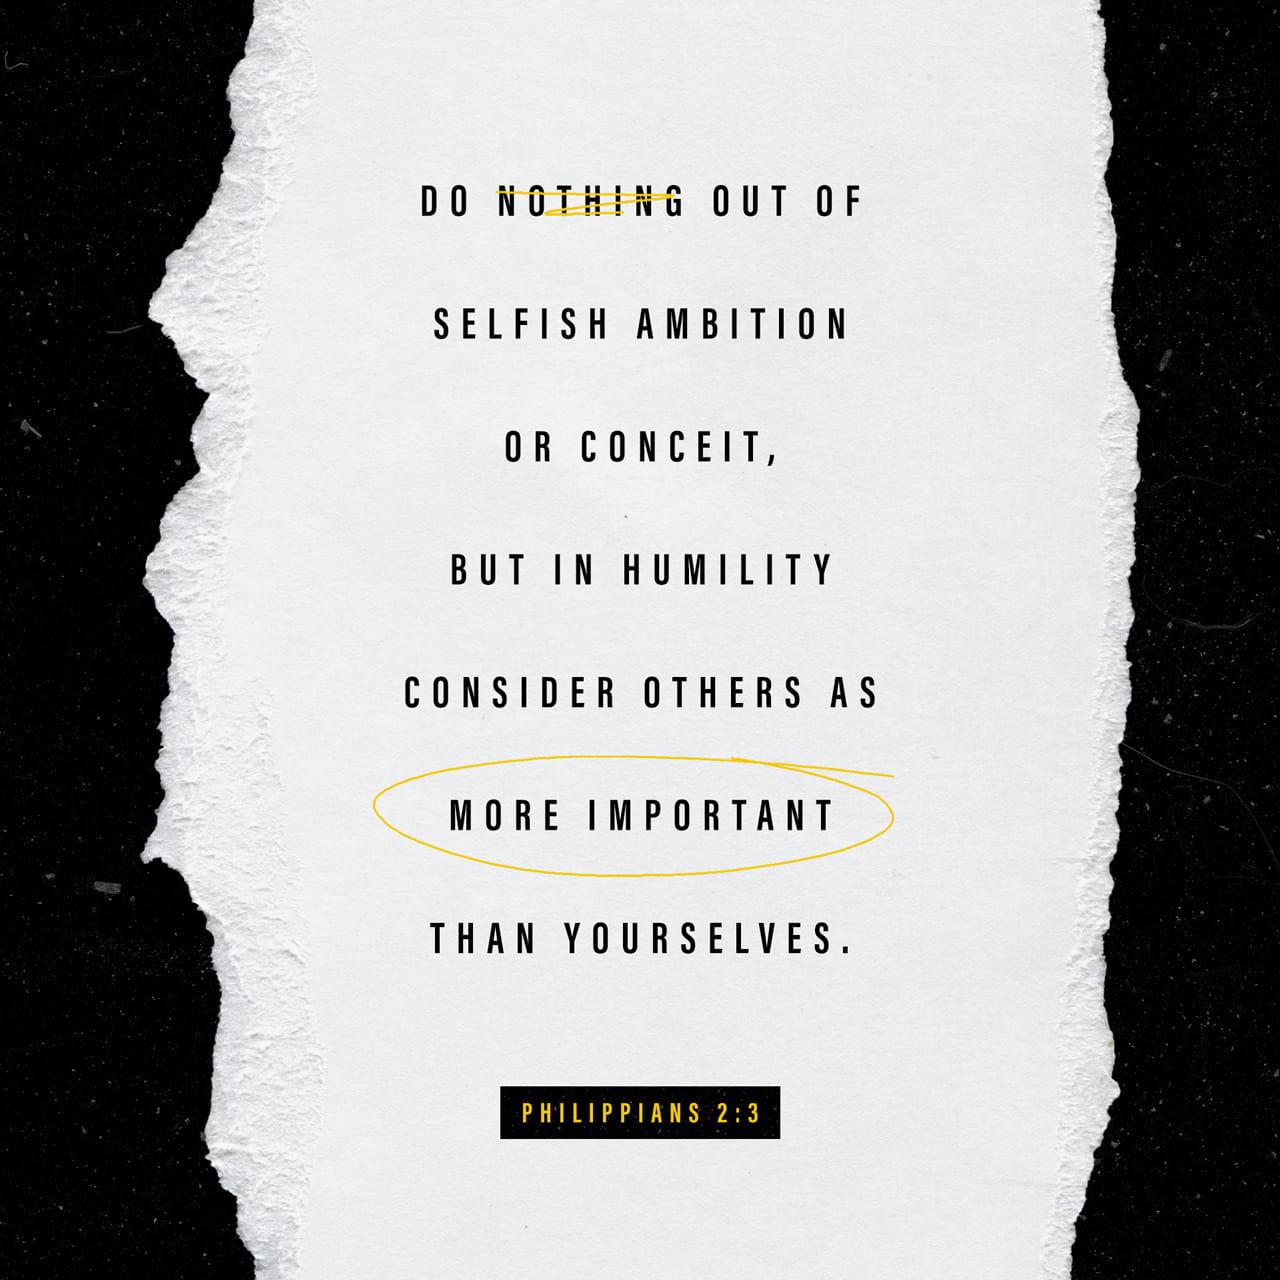 Bible Verse of the Day - day 153 - image 23018 (Philippians 2:1-4)